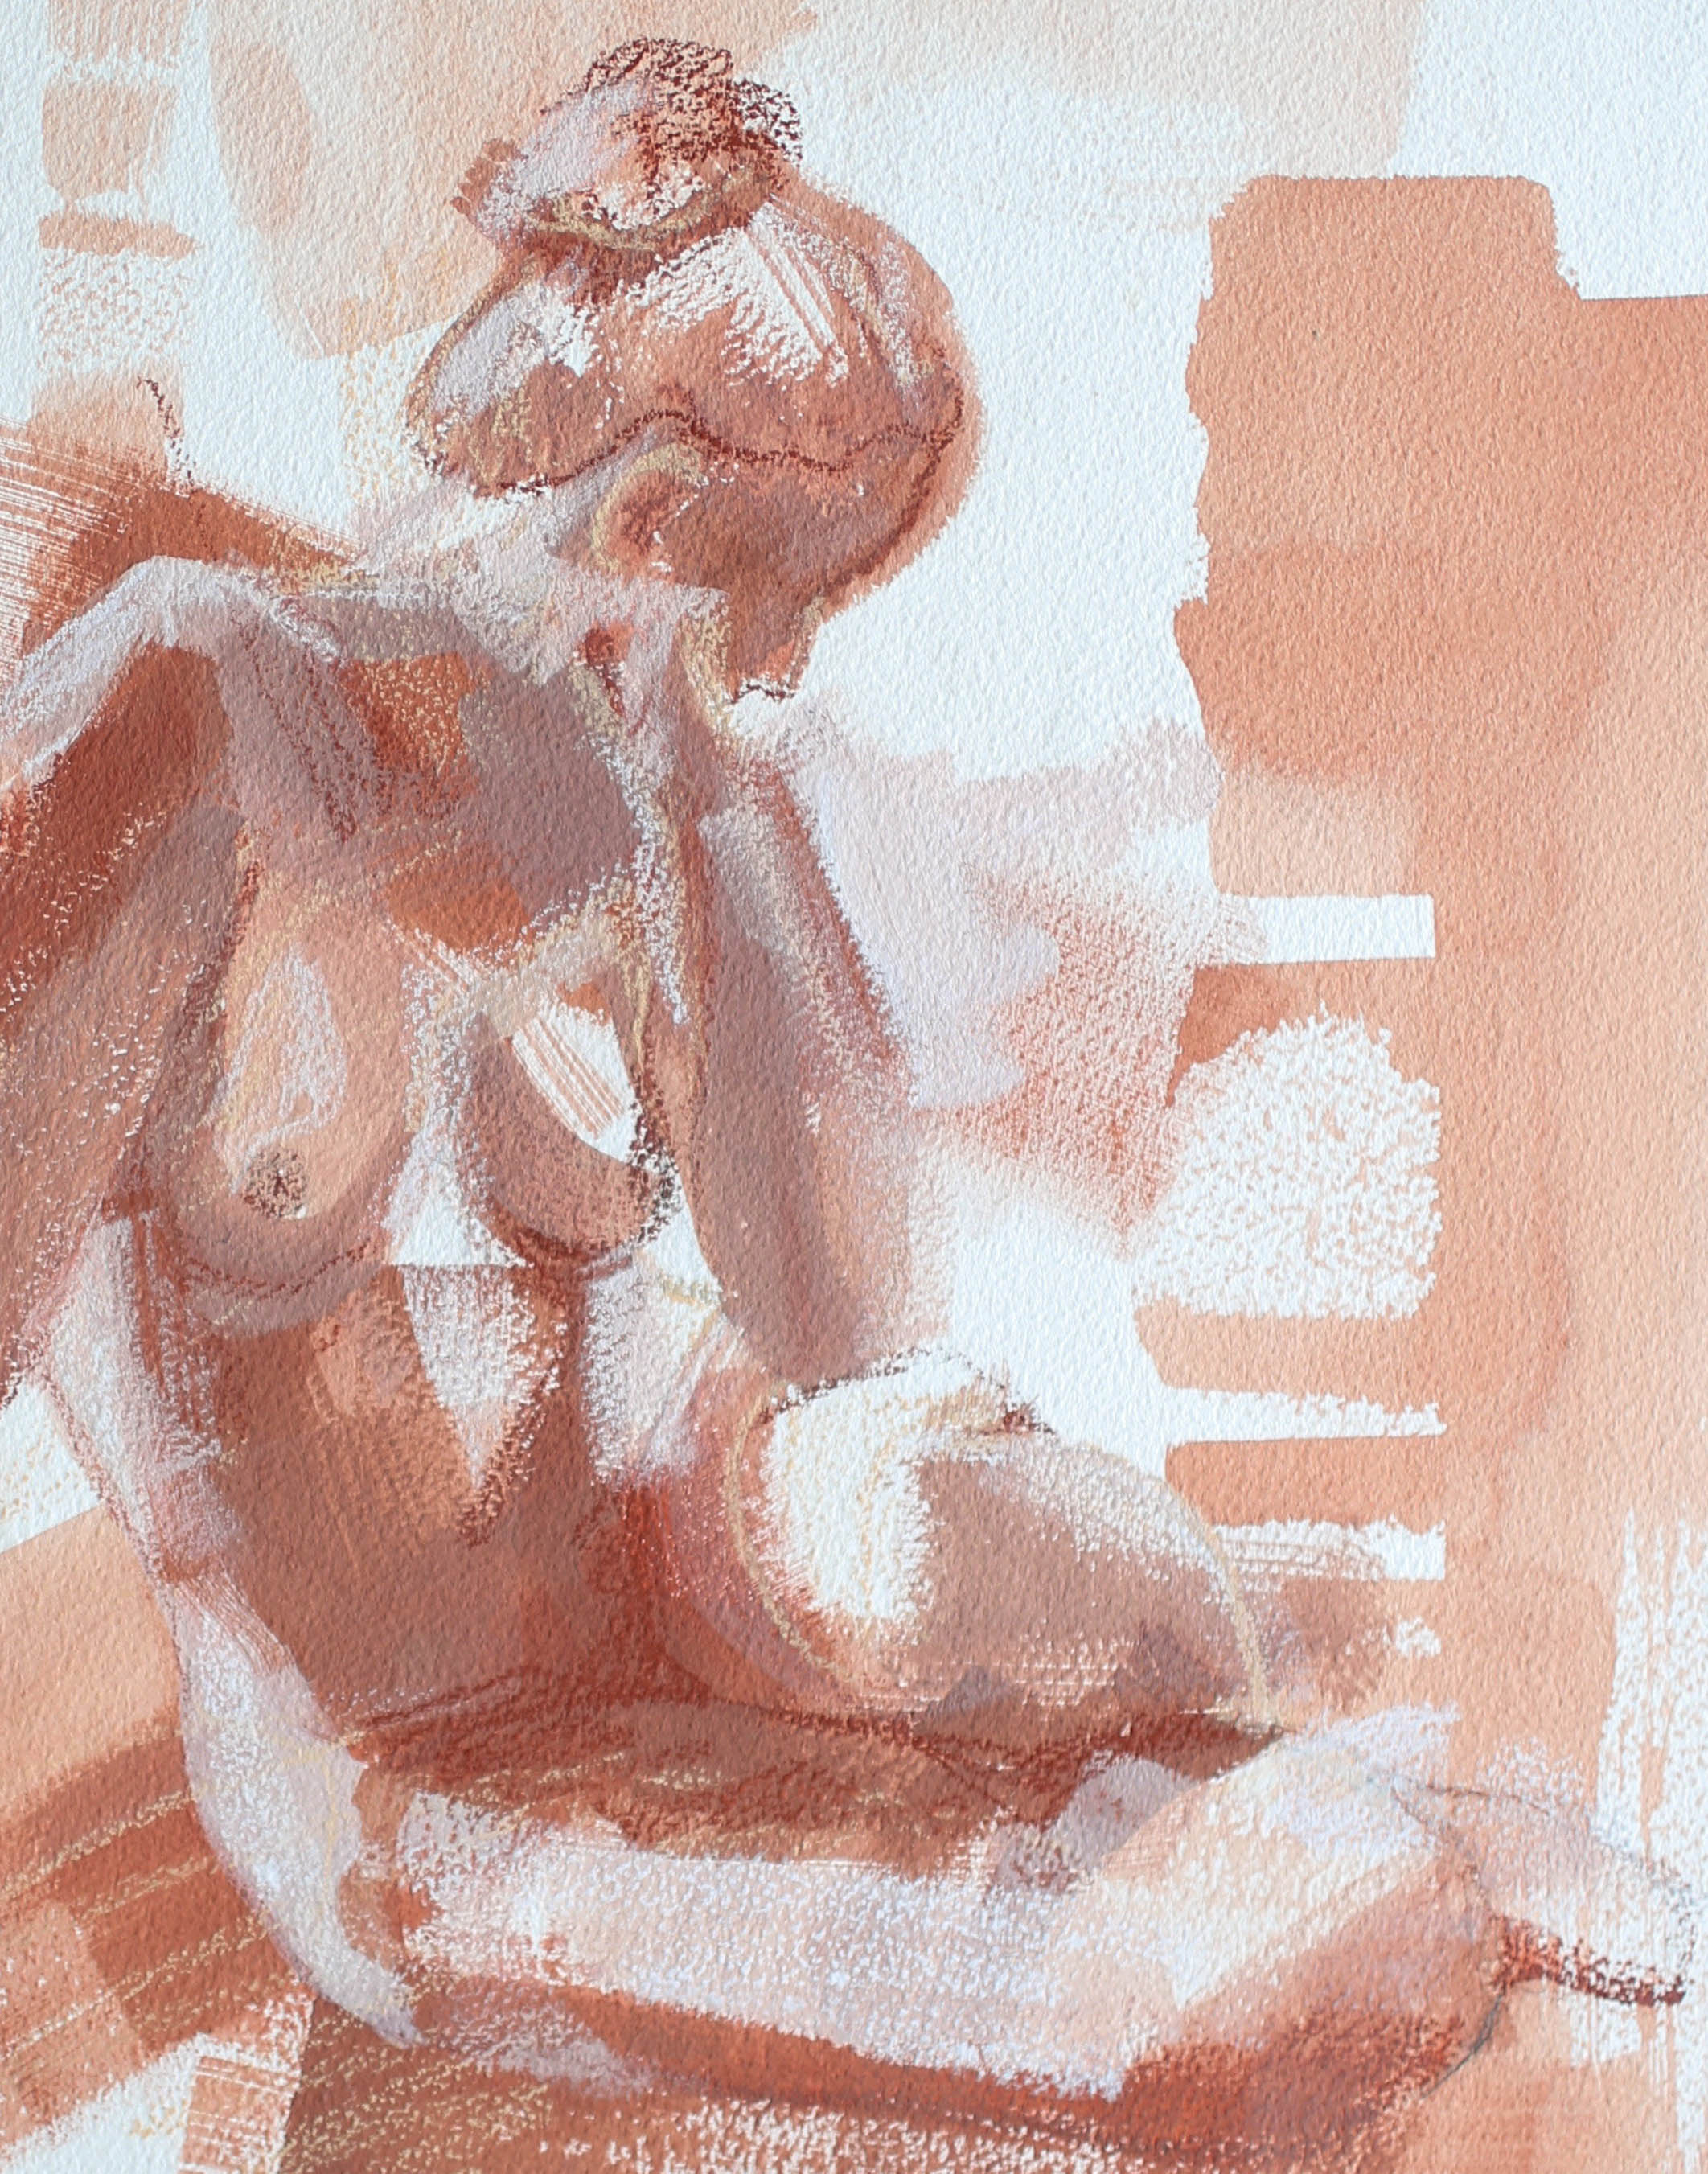 "What She's Made Of" 11x14 Katherine Corden Art  #abstractfigure #figurepainting